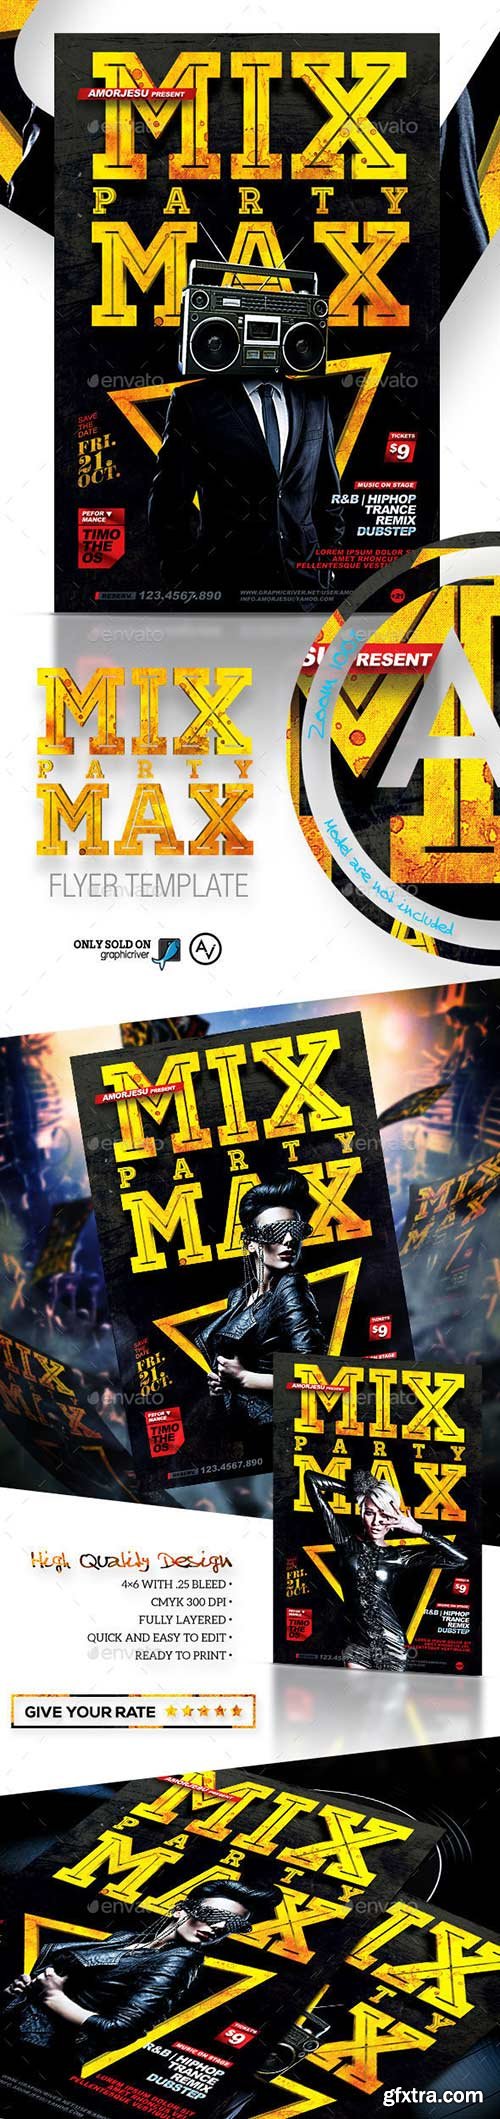 Graphicriver - Mix Max Party Flyer Template 11739910